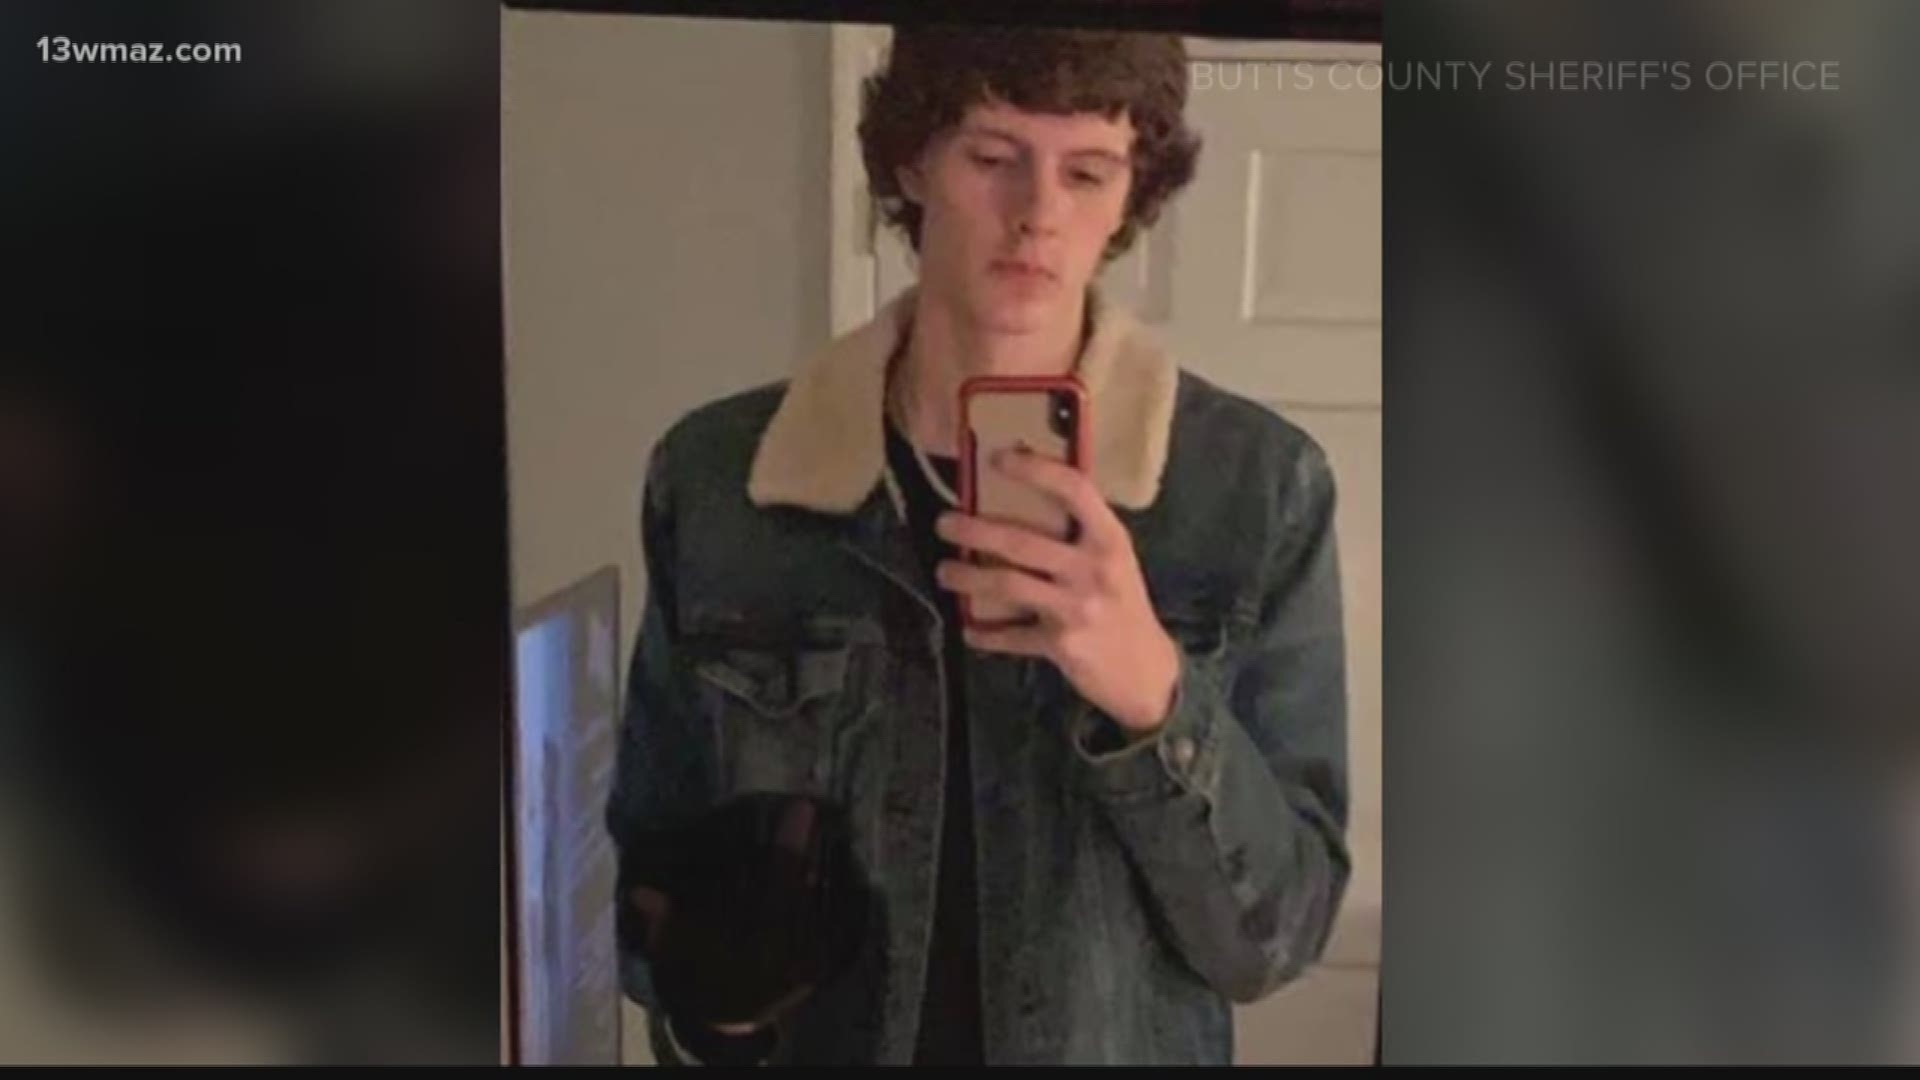 The Butts County Sheriff's Office says they're looking for a 20-year-old man in connection with a homicide, and a 21-year-old who's in danger might be with him.